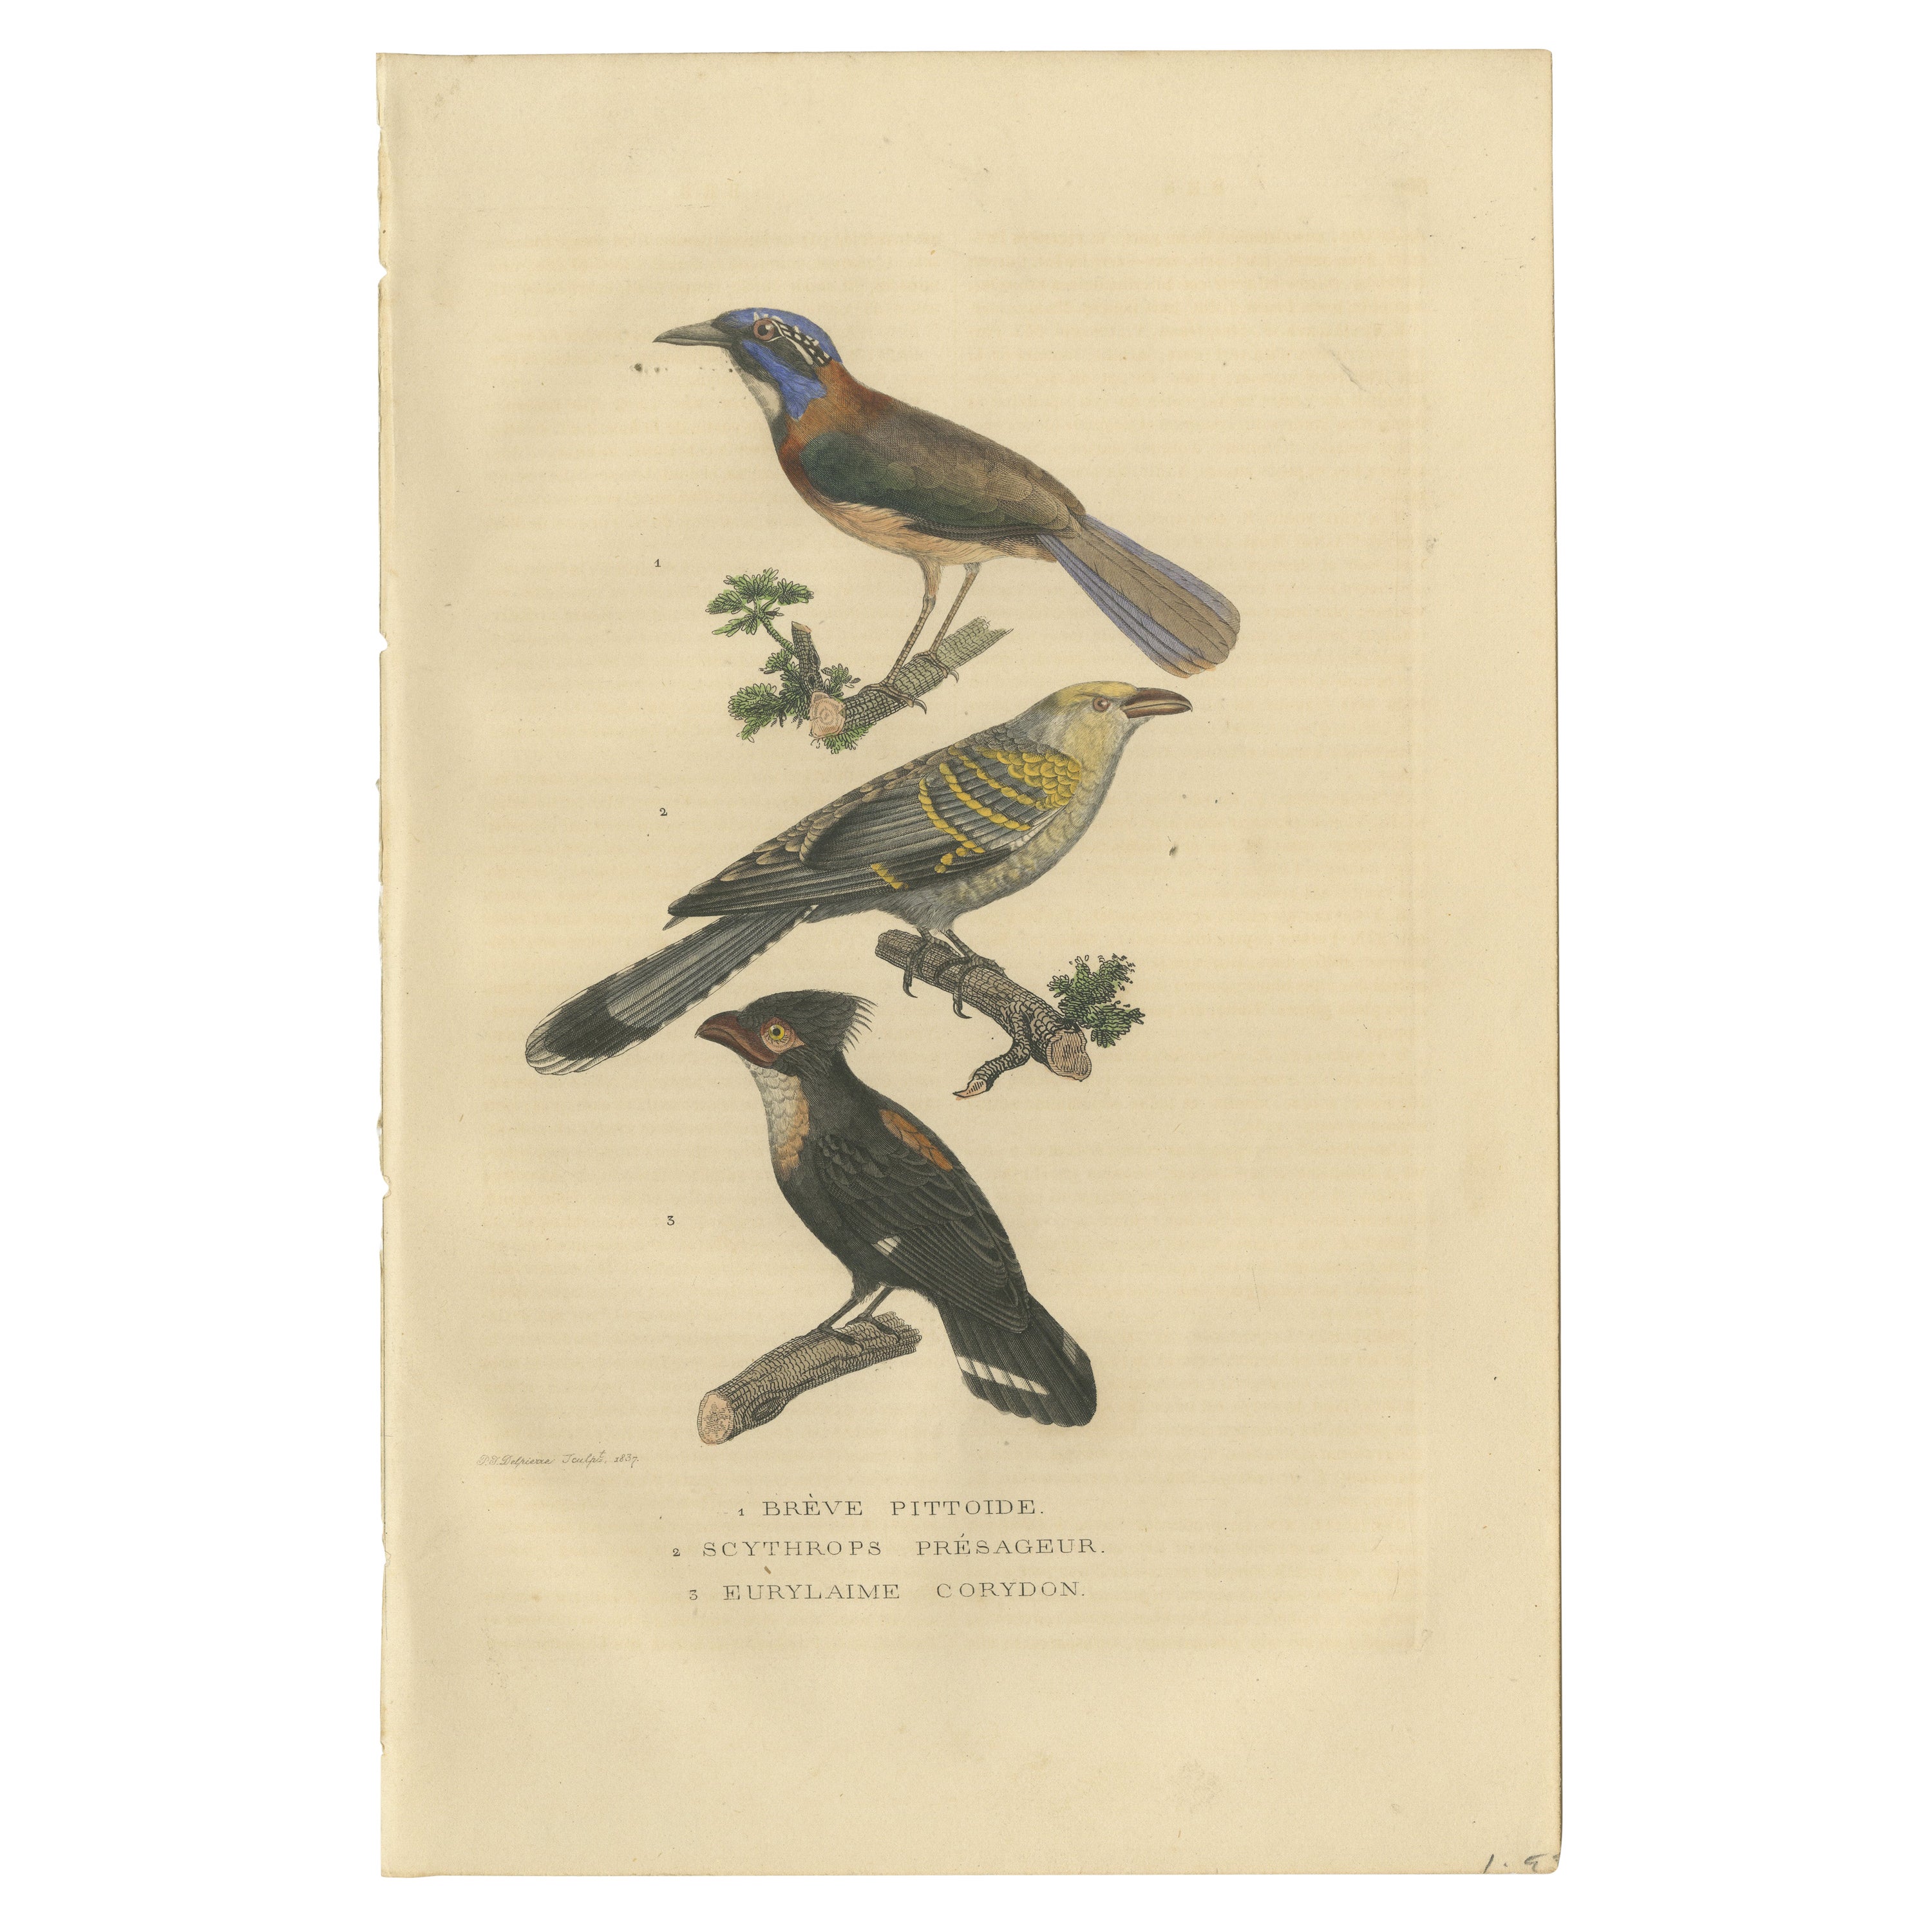 Old Bird Print of a Pitta Ground-roller, Channel-billed Cuckoo, Dusky Broadbill For Sale